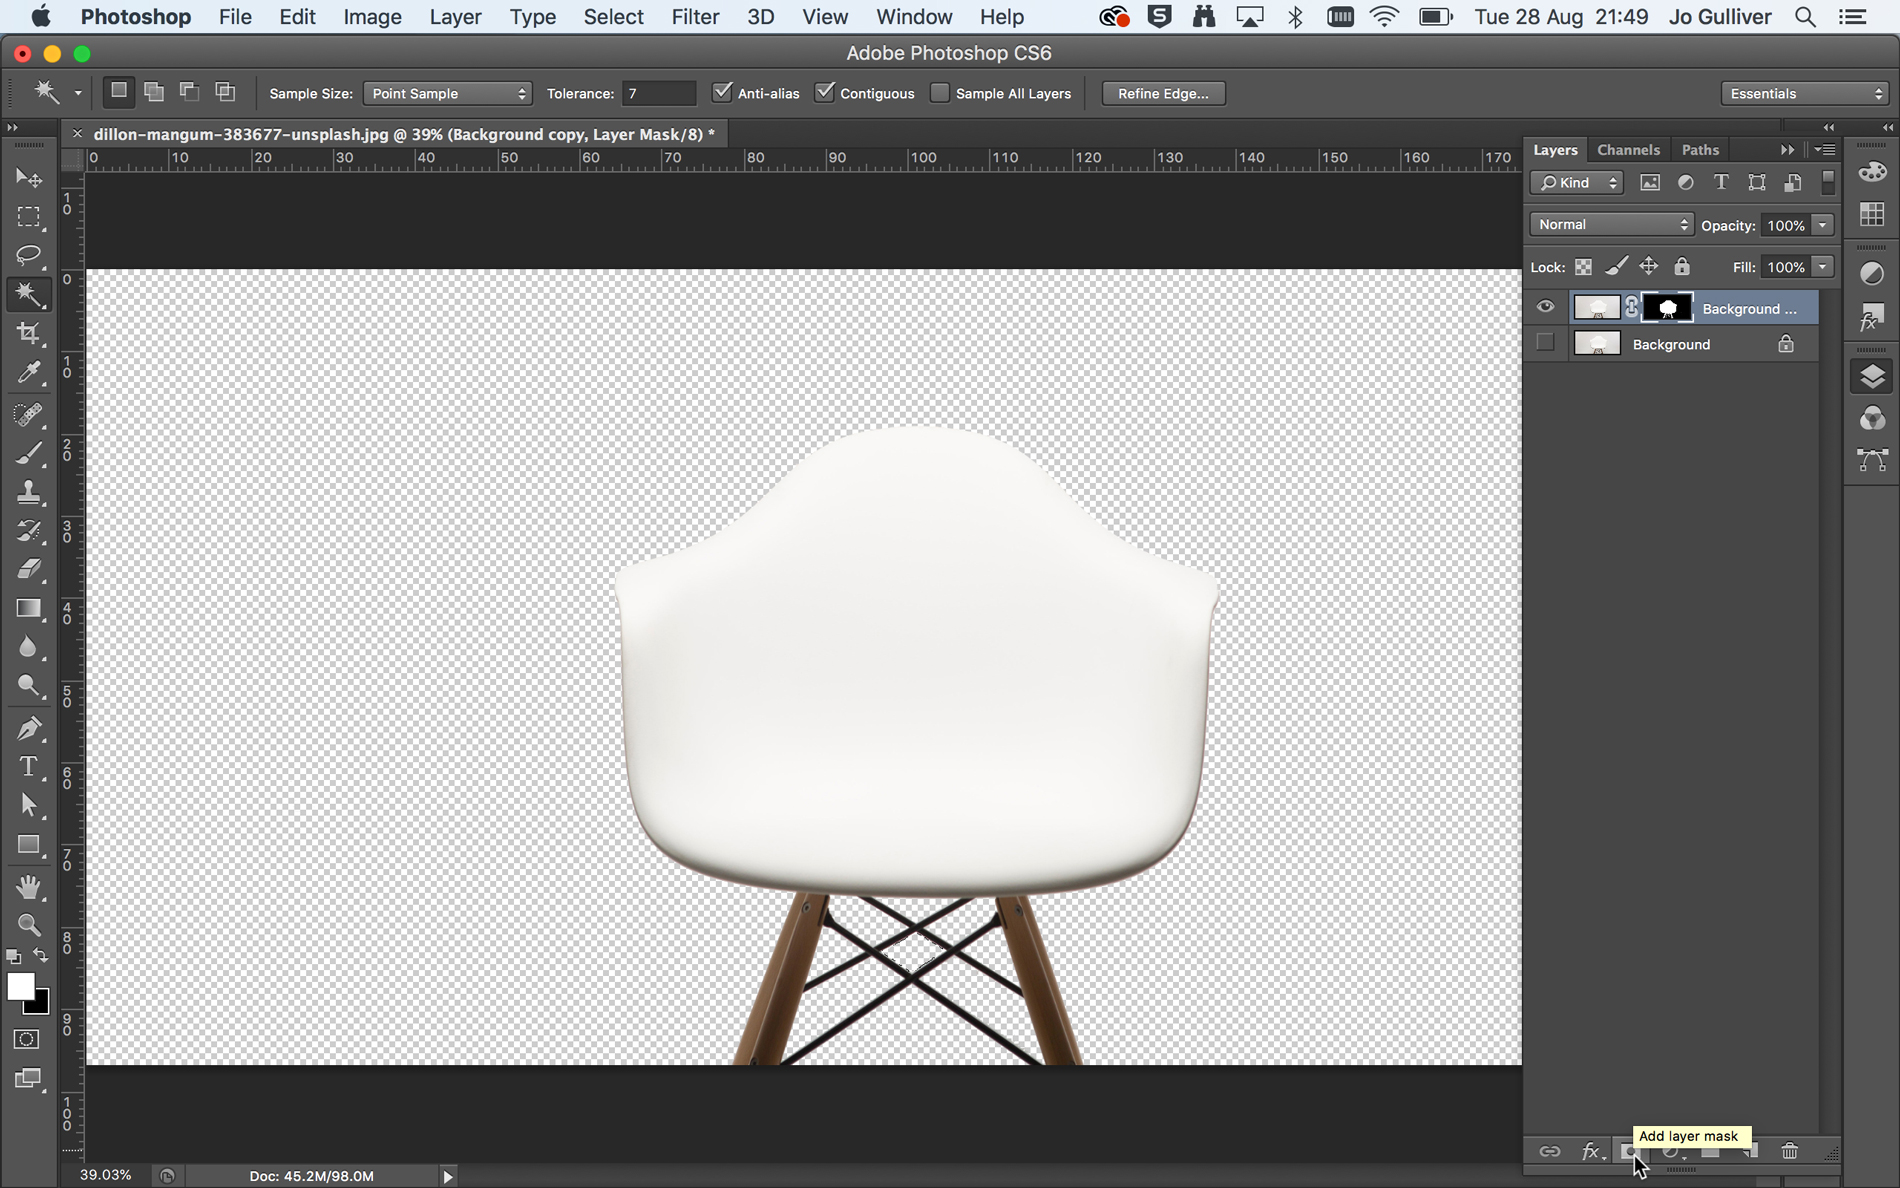 Screenshot of white chair with background removed in Photoshop